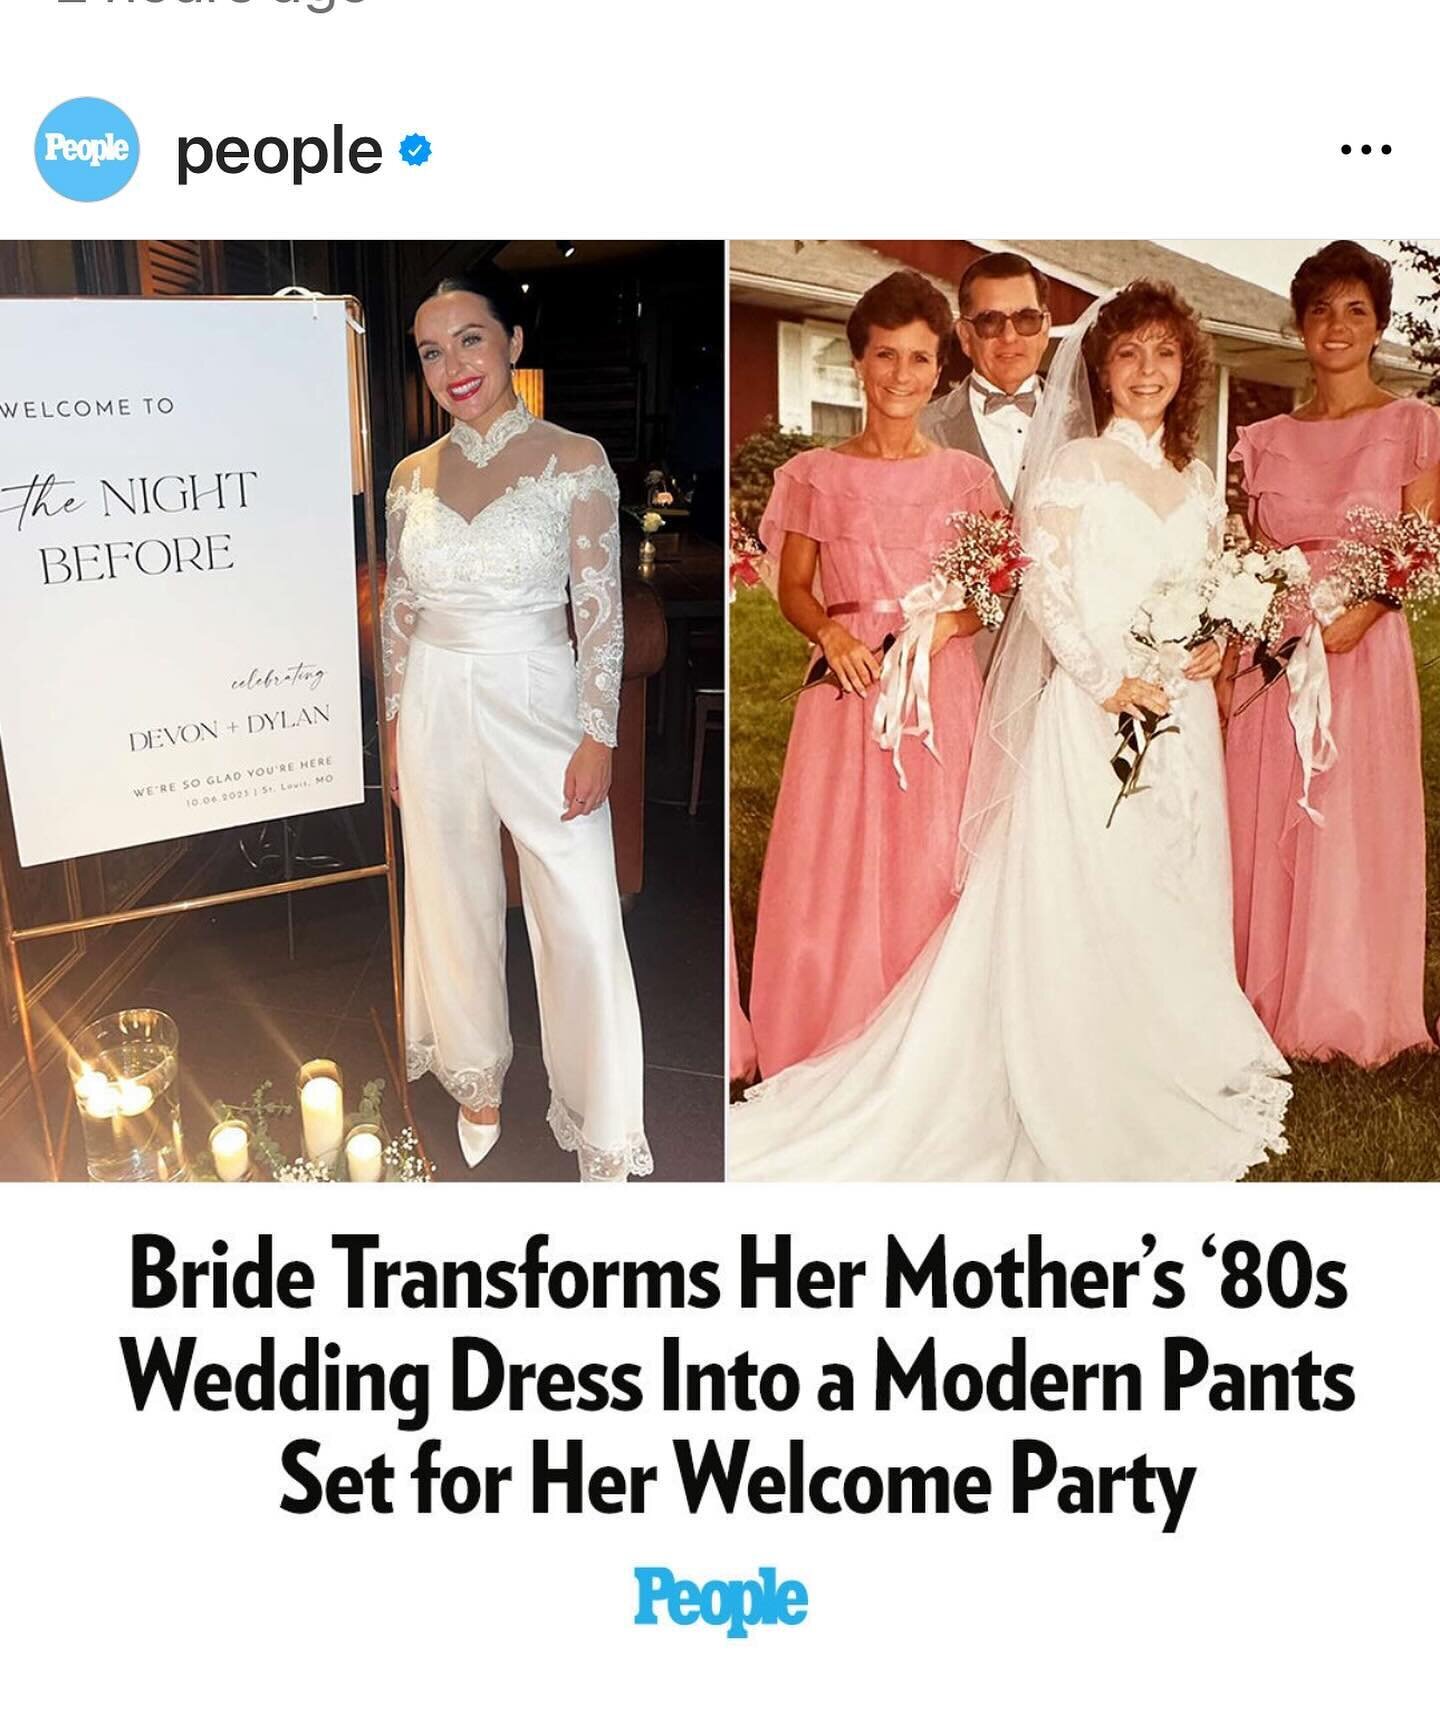 &bull; d e v o n + d y l a n &bull;

Our sweet Devon made @people magazine by posting about her mother&rsquo;s wedding dress that she turned into a designer pants suit for their welcome party the night before their @thedogwoodstl wedding! We can&rsqu